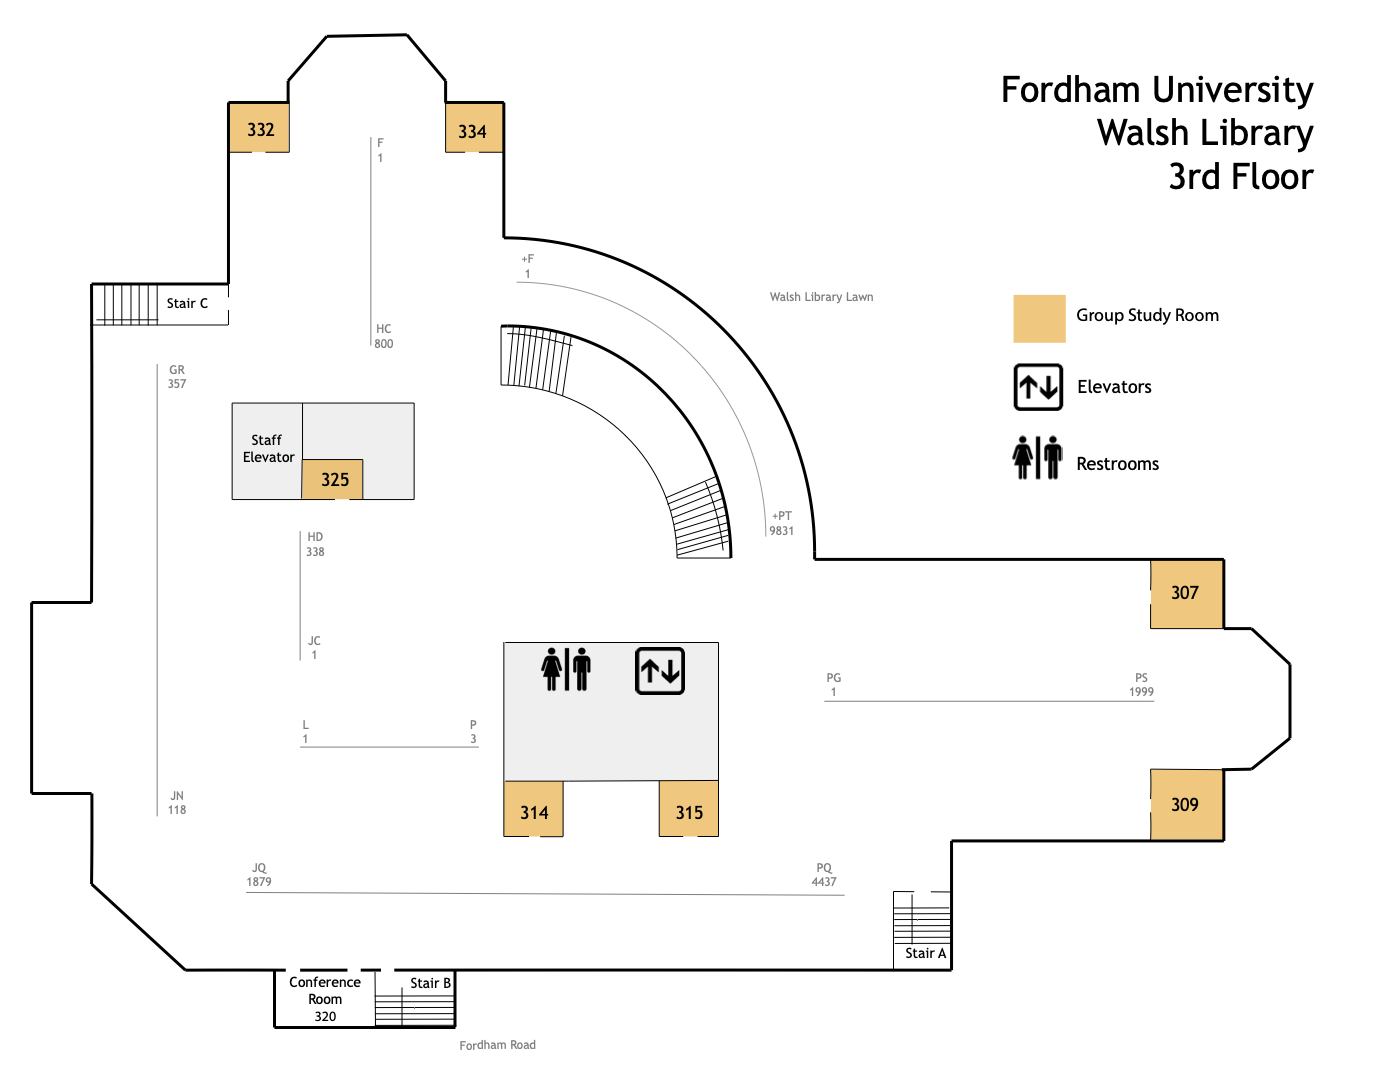 floor plan of Walsh Library, 3rd floor, showing 7 group study rooms 307, 309, 314, 315, 325, 332, and 334